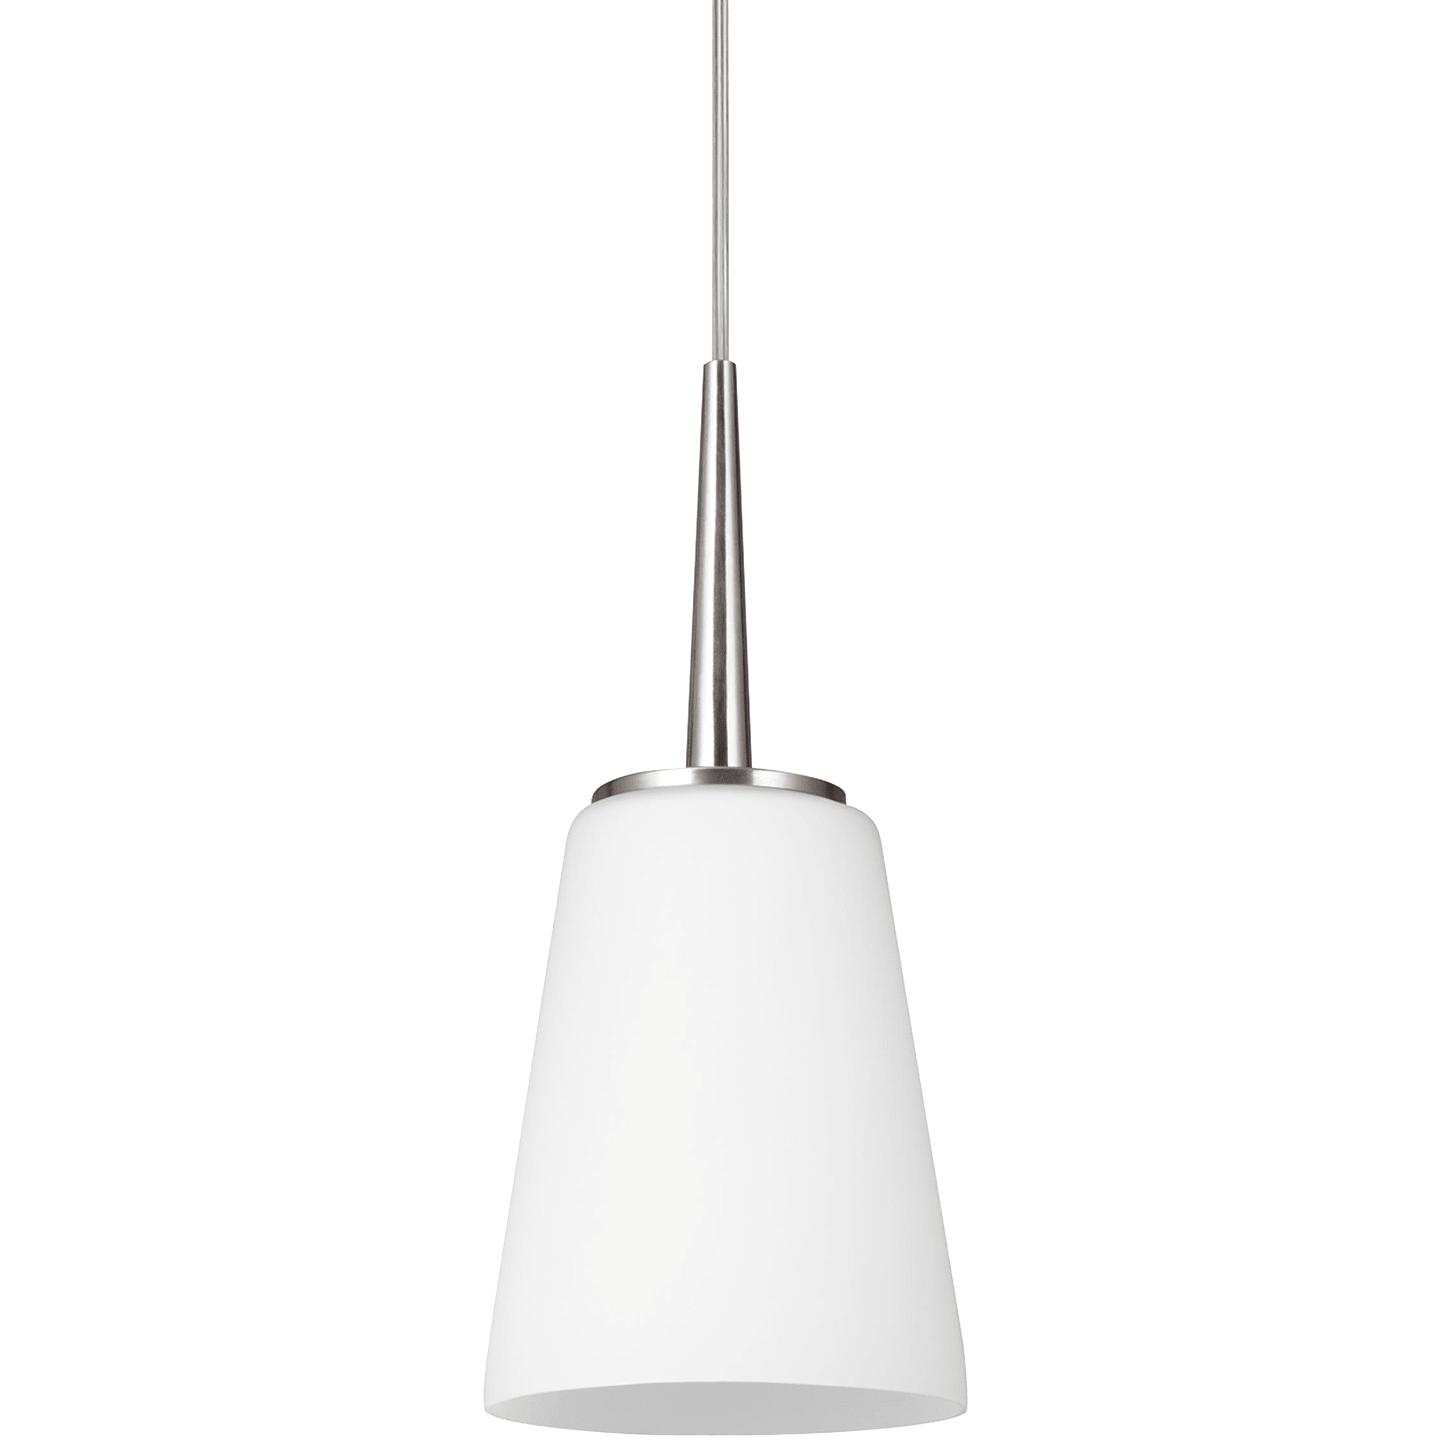 Brushed Nickel Bulb(s) Not Included